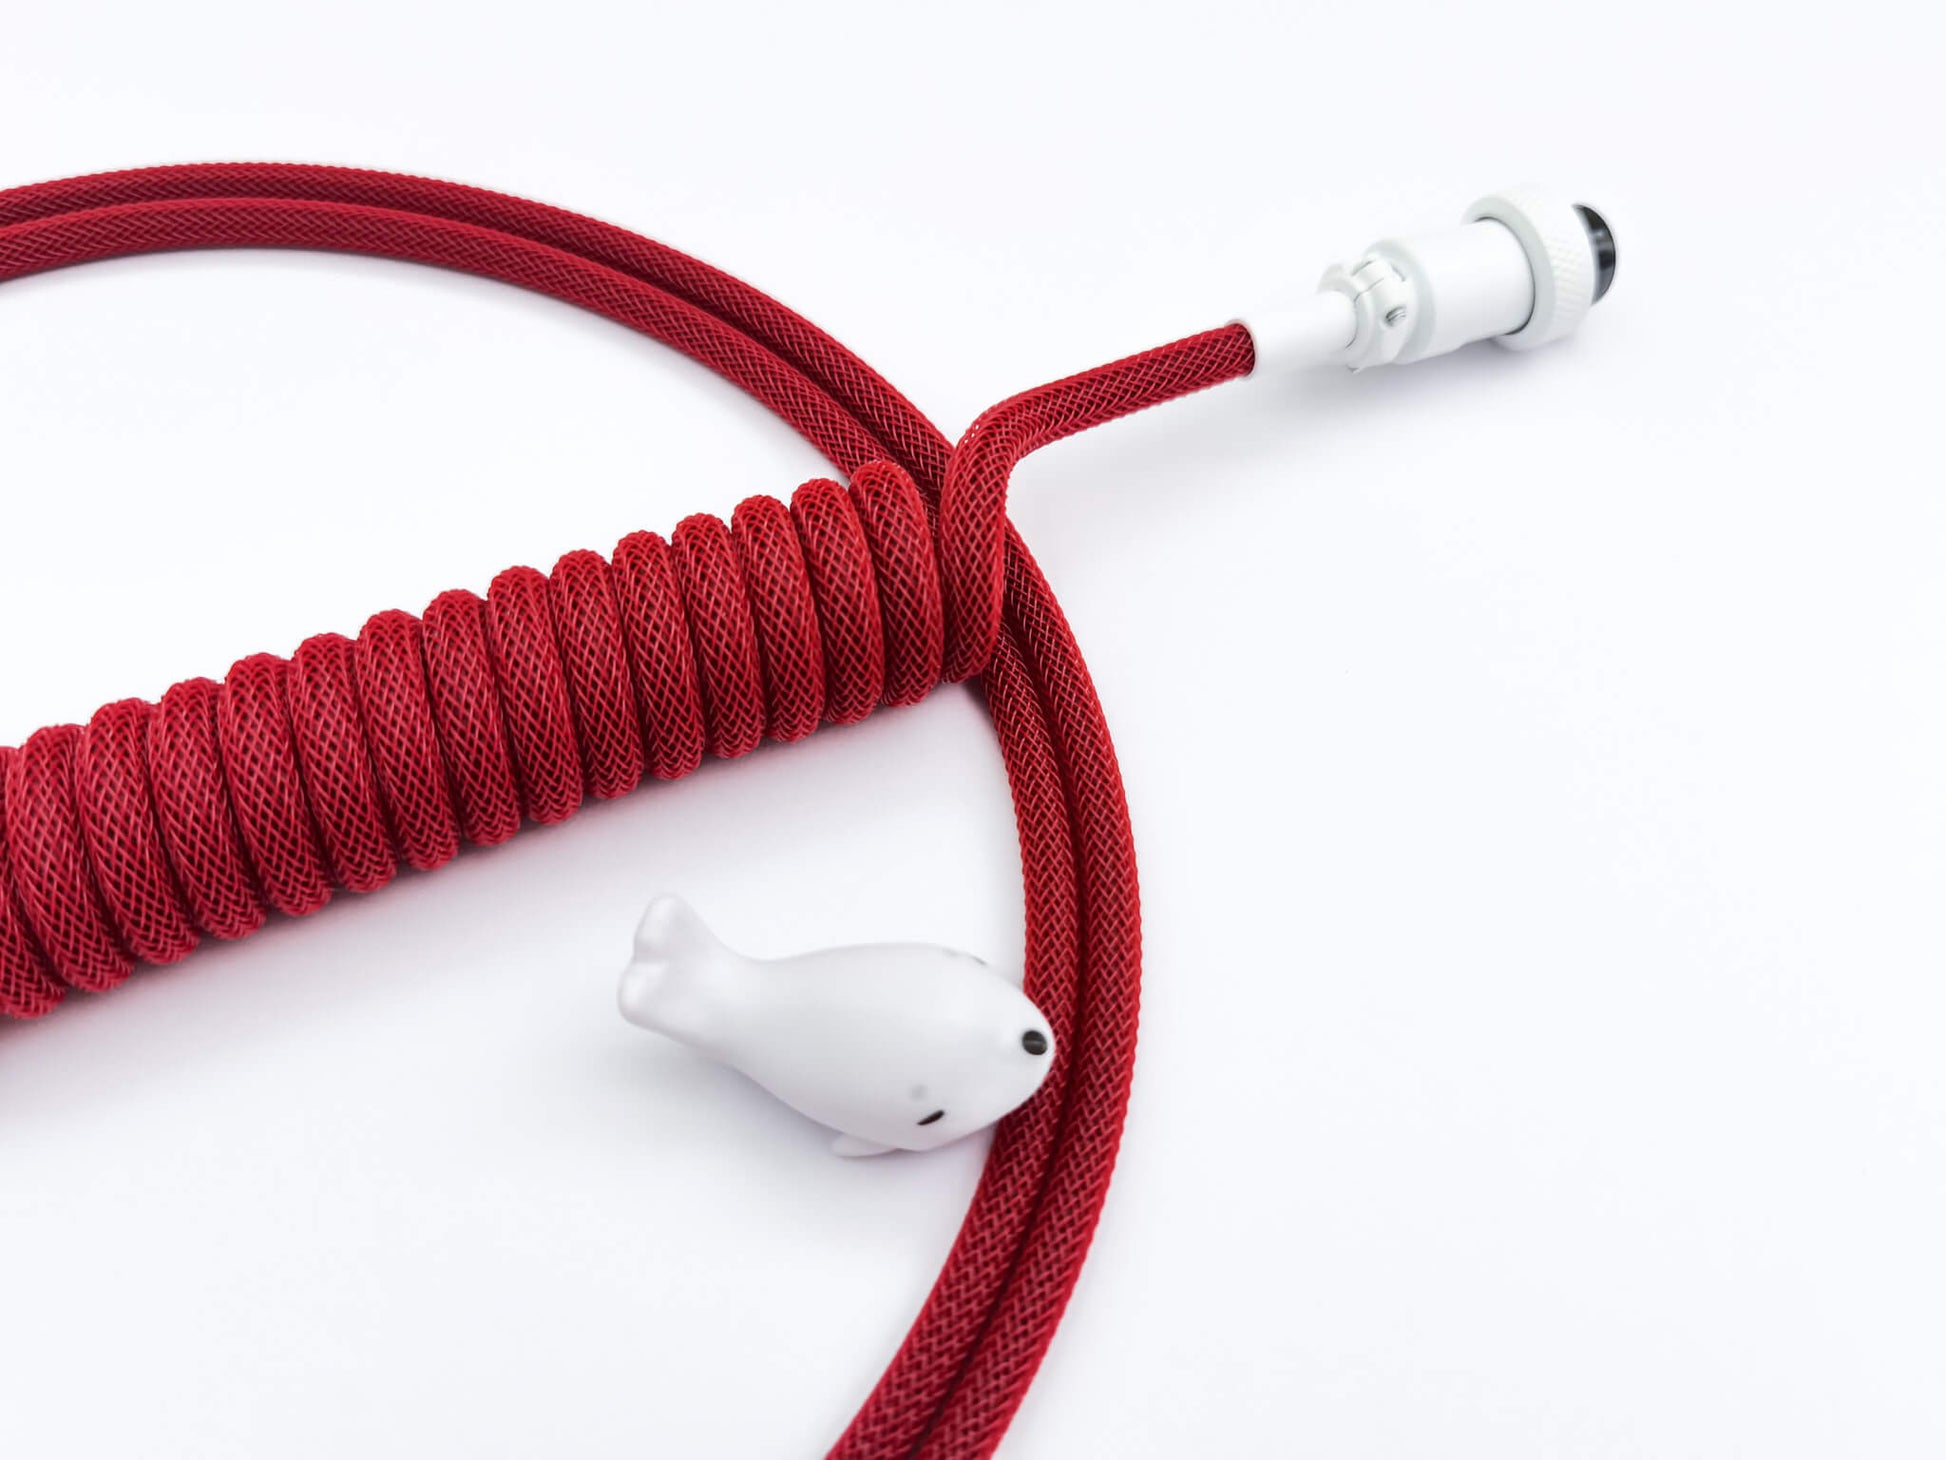 Red custom coiled cable